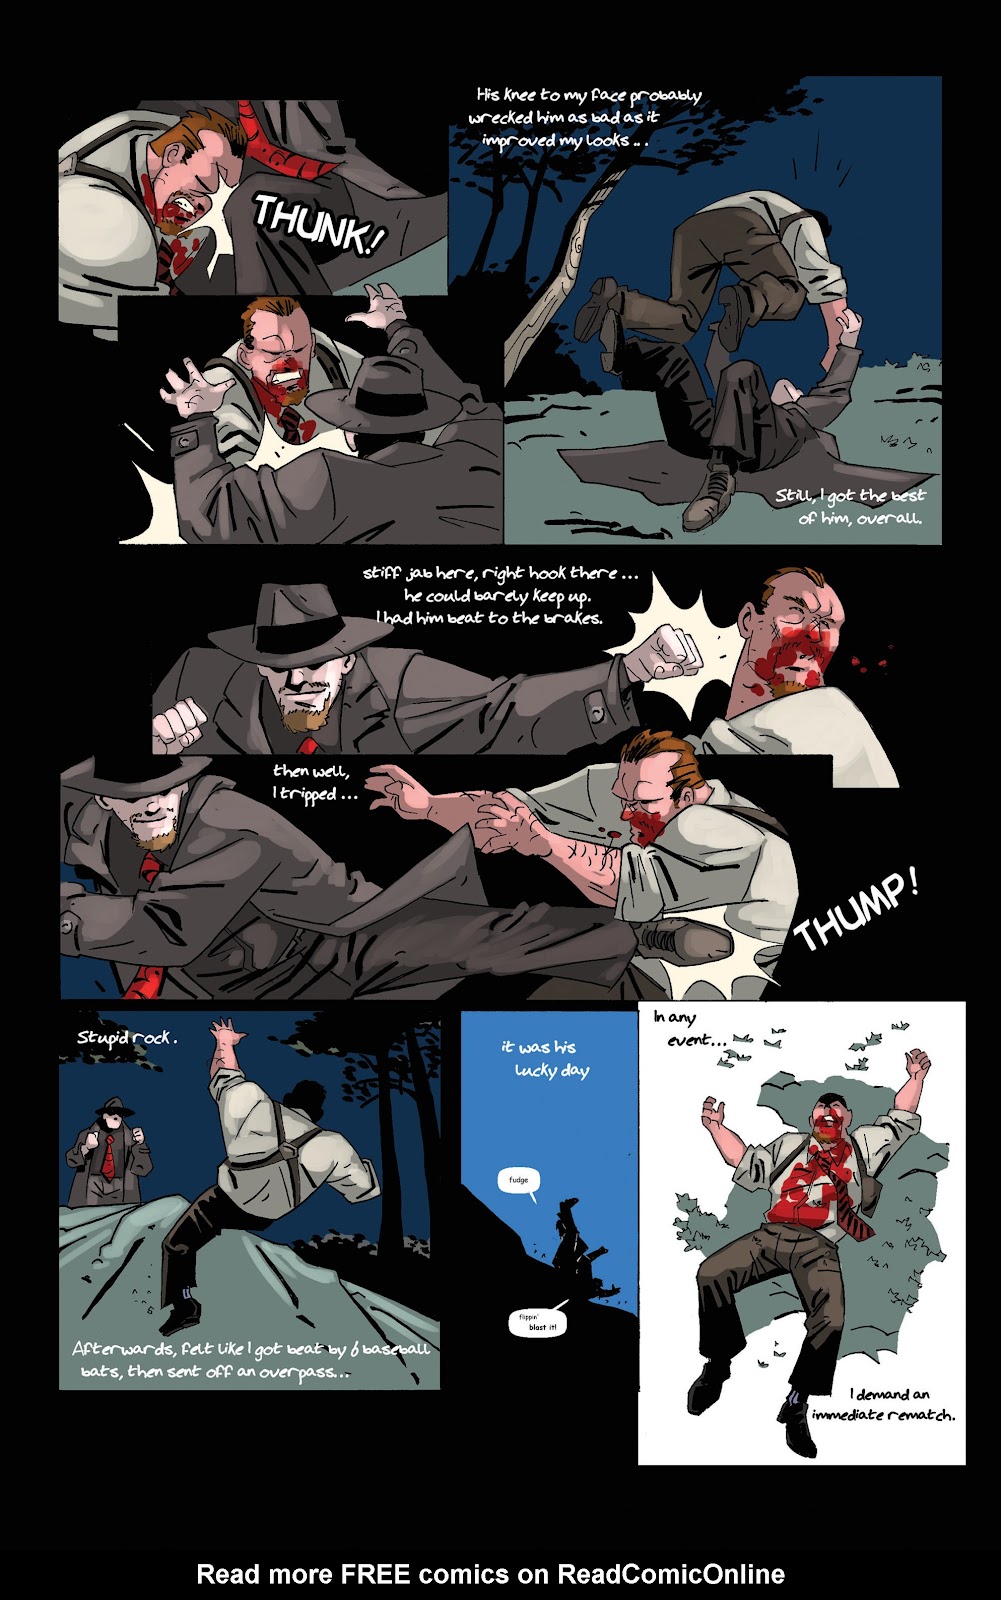 Strong Box: The Big Bad Book of Boon issue 3 - Page 9